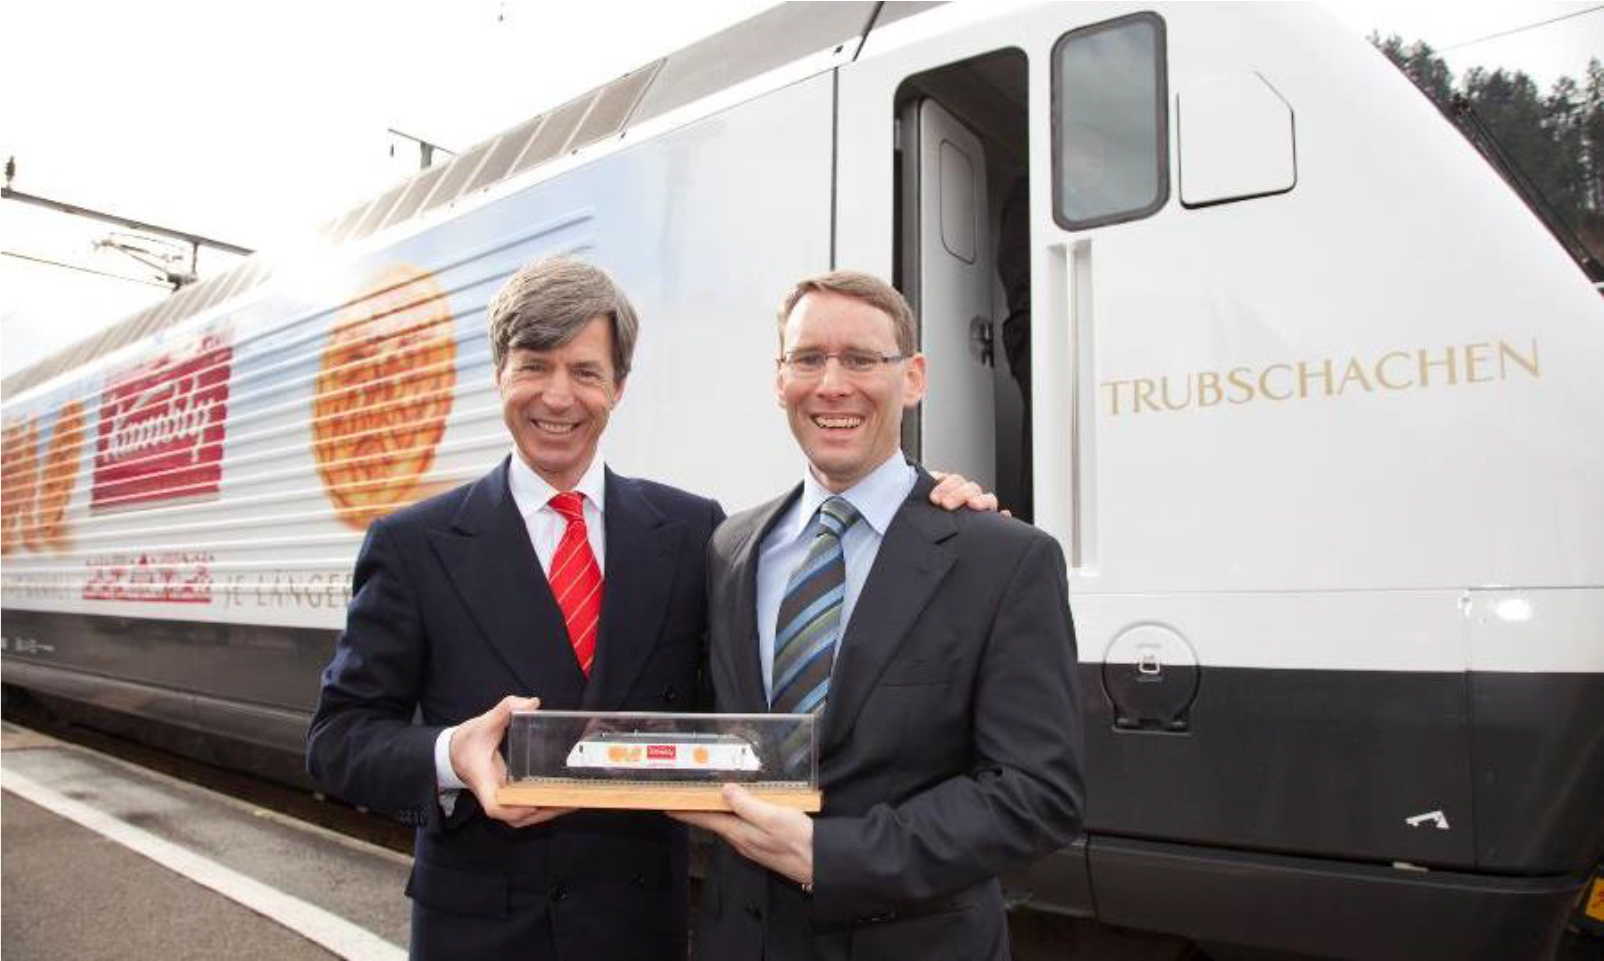 Two men in suits are seen smiling and posing in front of a train with the image of cookies on the side of the train with the Kambly logo on it. The word Trubschachen is seen on the front of the train.